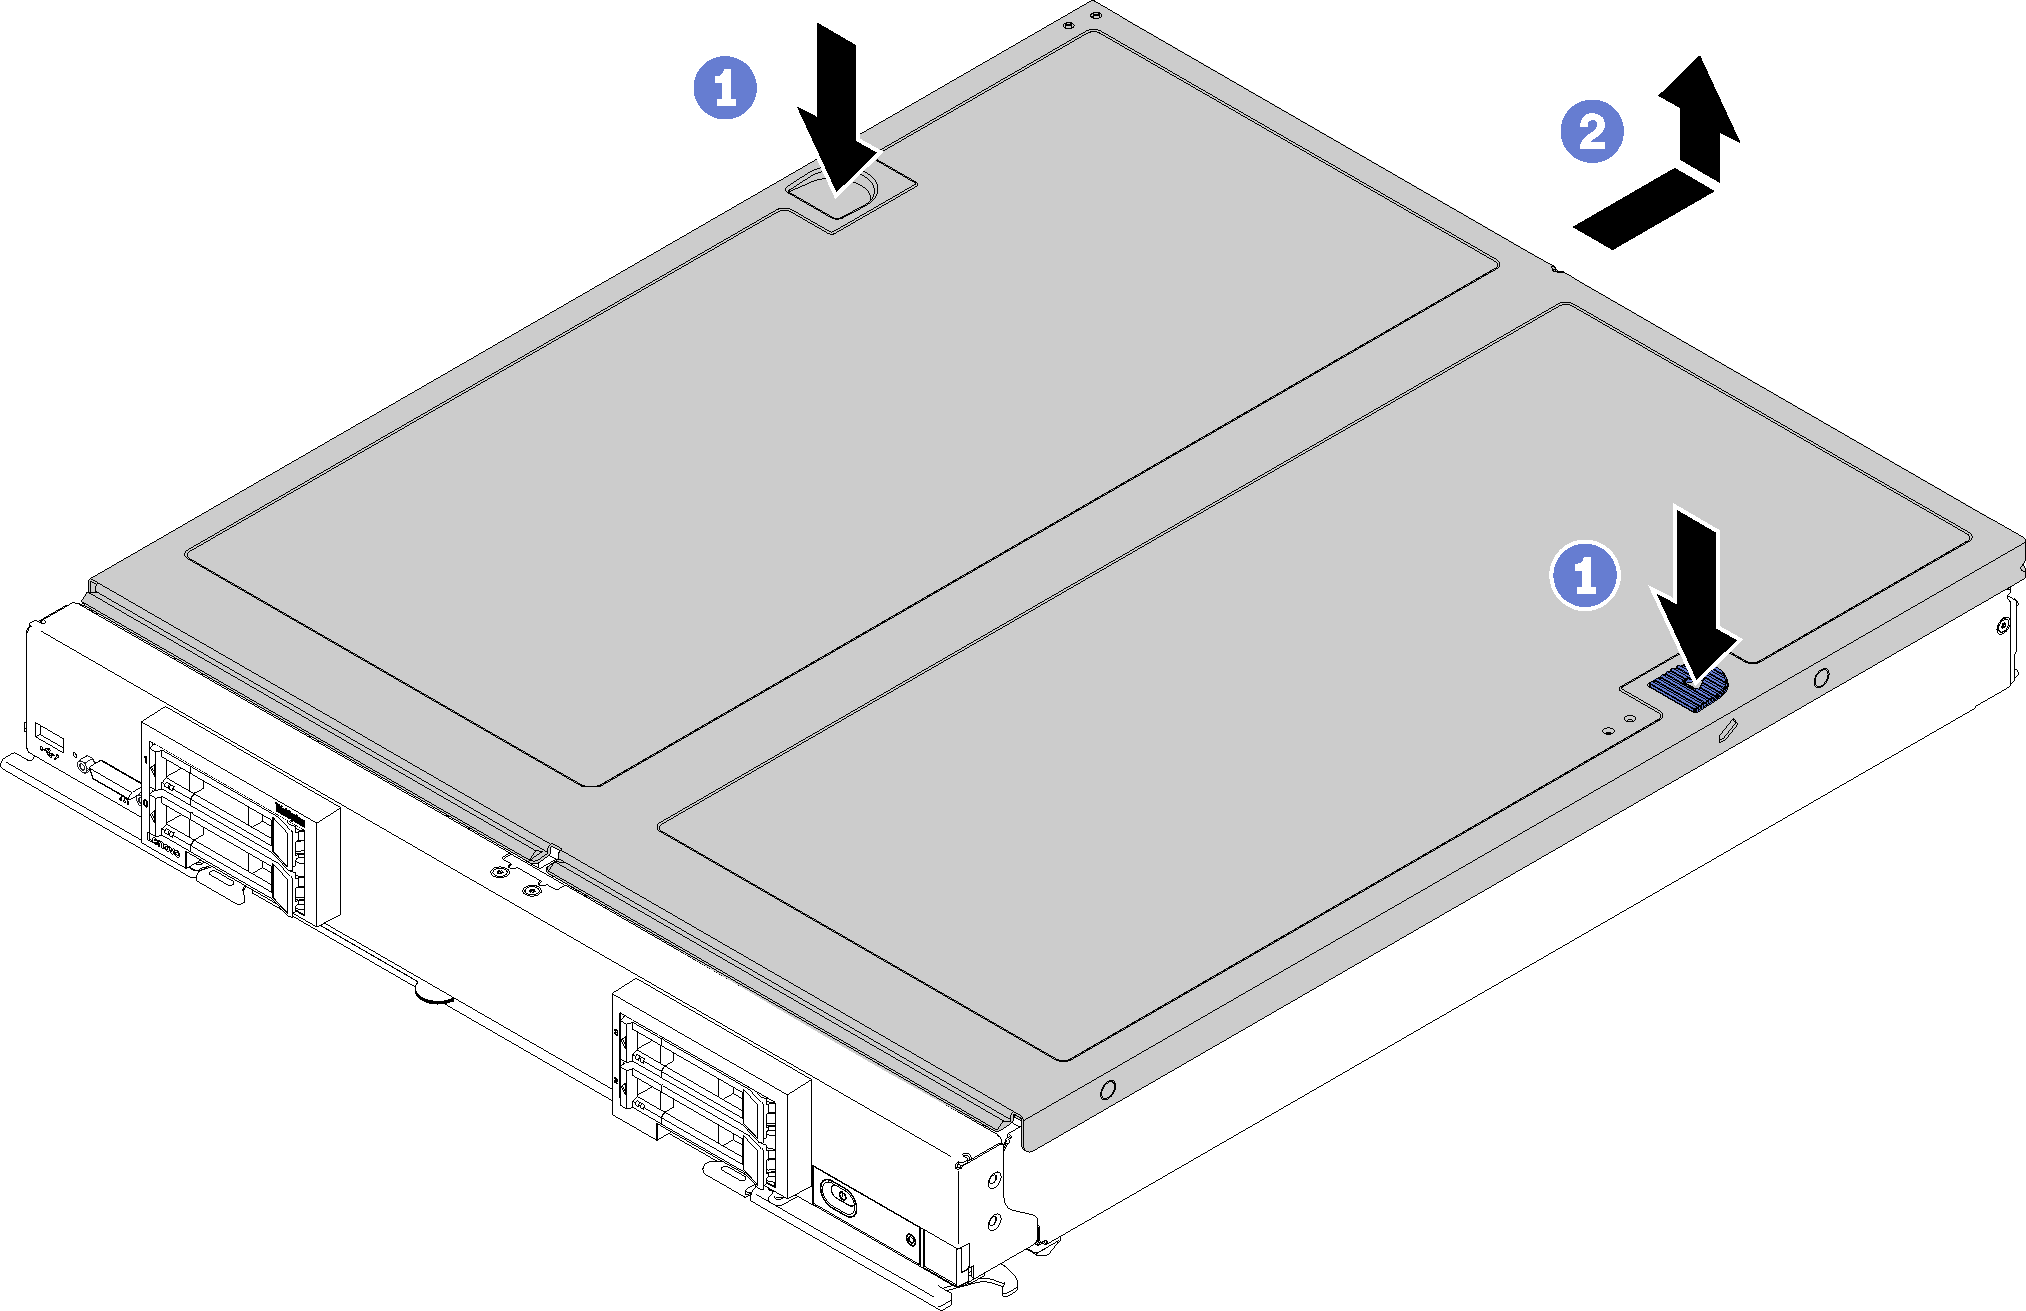 Graphic illustrating removal compute node cover